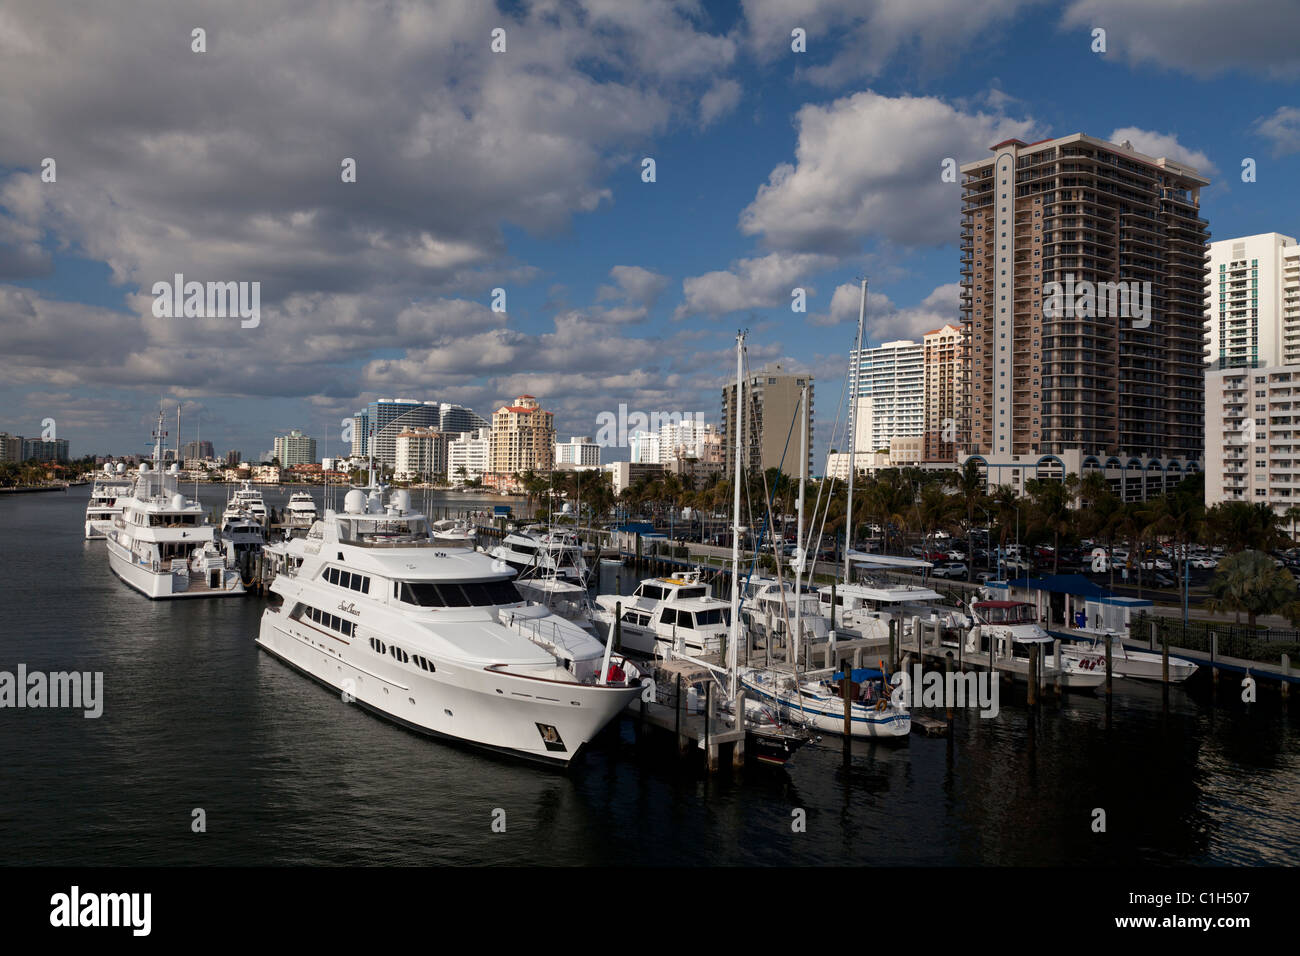 Luxury yachts docked in intercoastal waterway with Fort Lauderdale hotels in background. Stock Photo